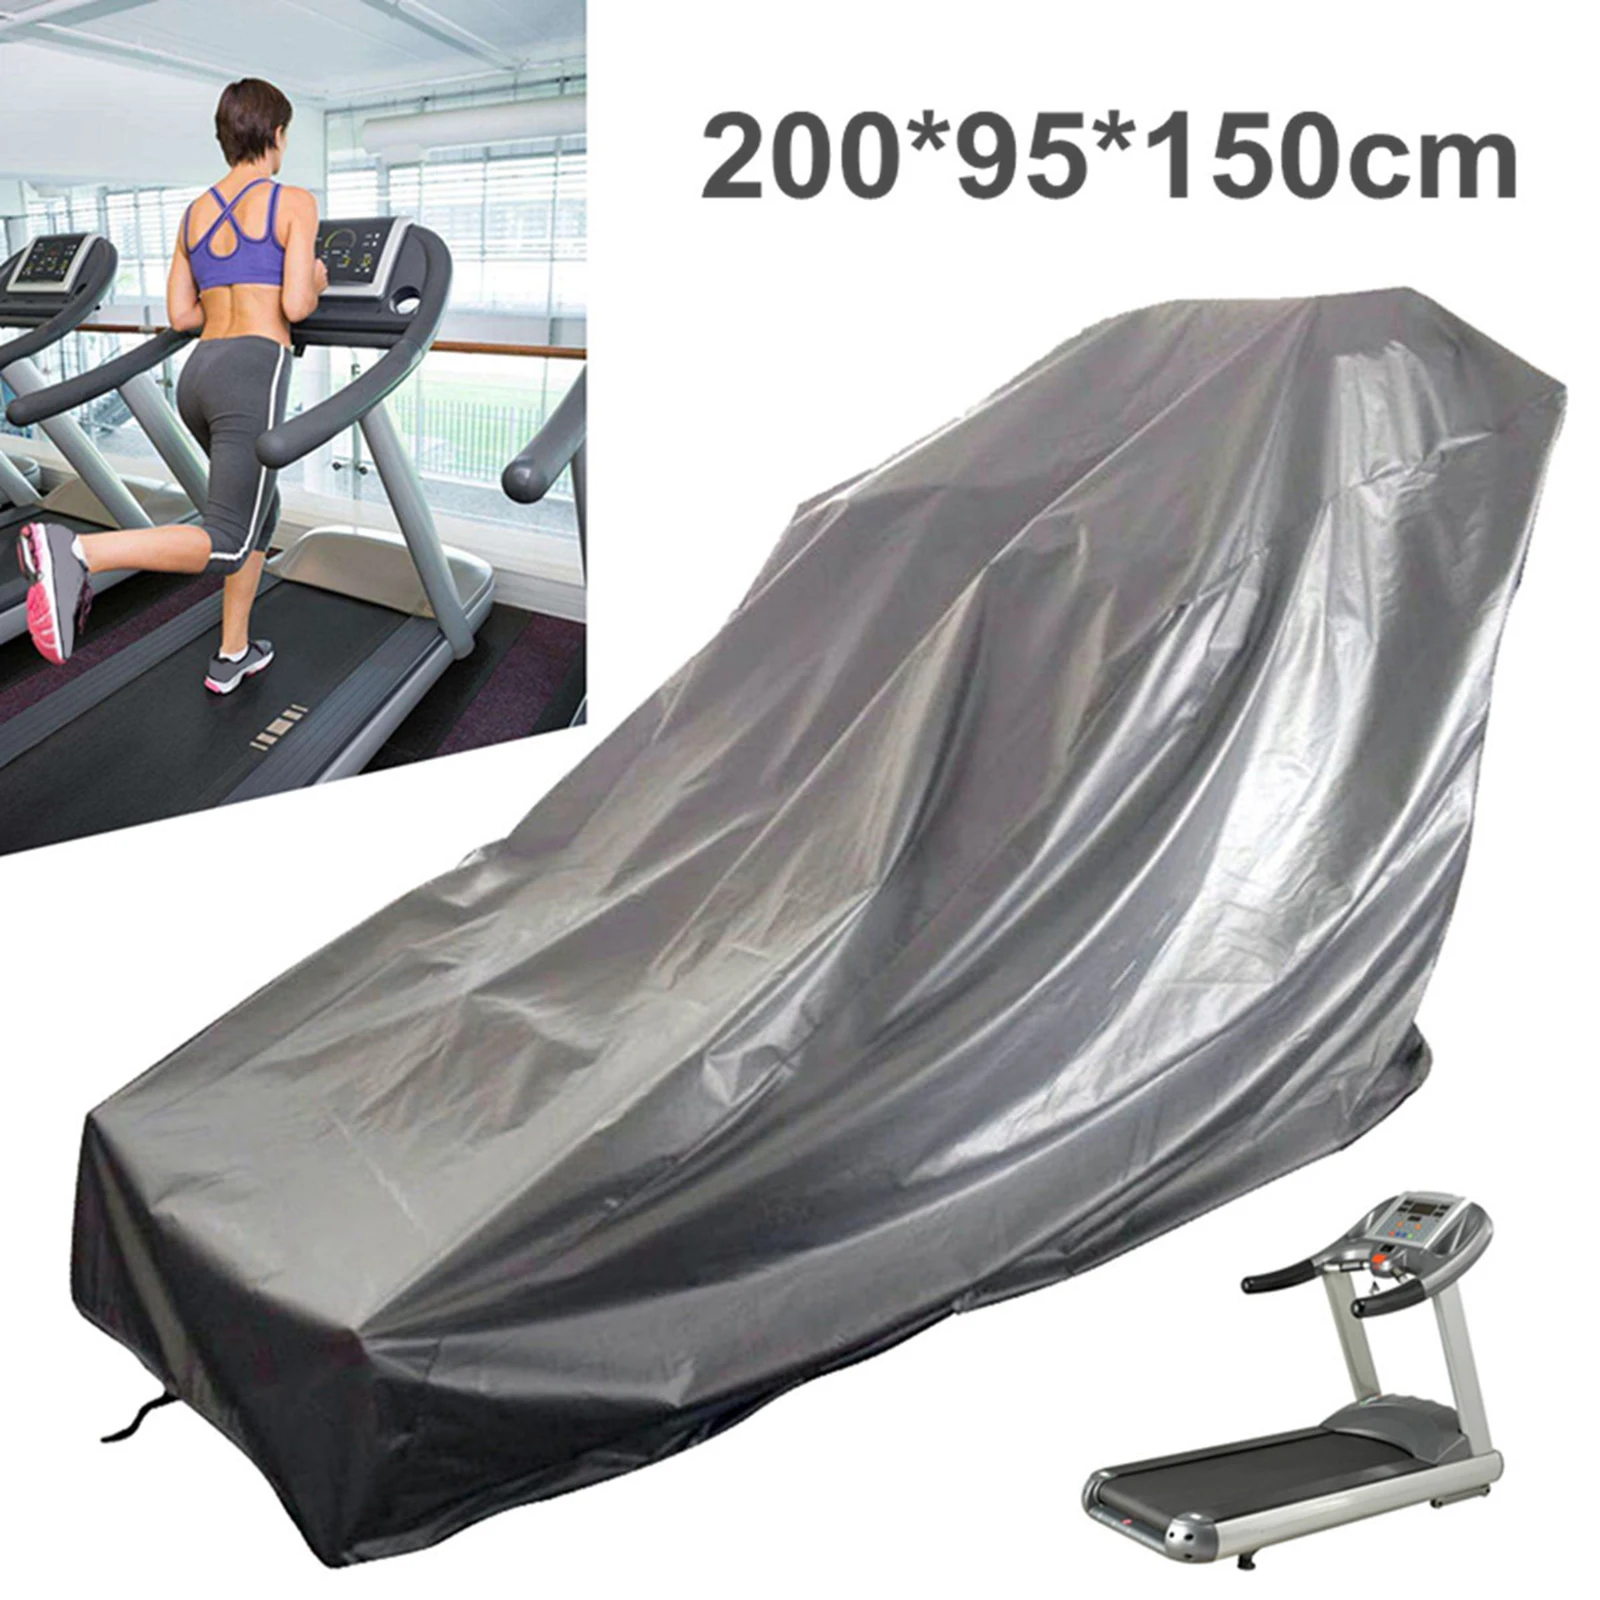 Portable Treadmill Cover Dust-Proof Windproof Oxford Cloth Exercise Bike Cover Protective Covers Bike Accessories